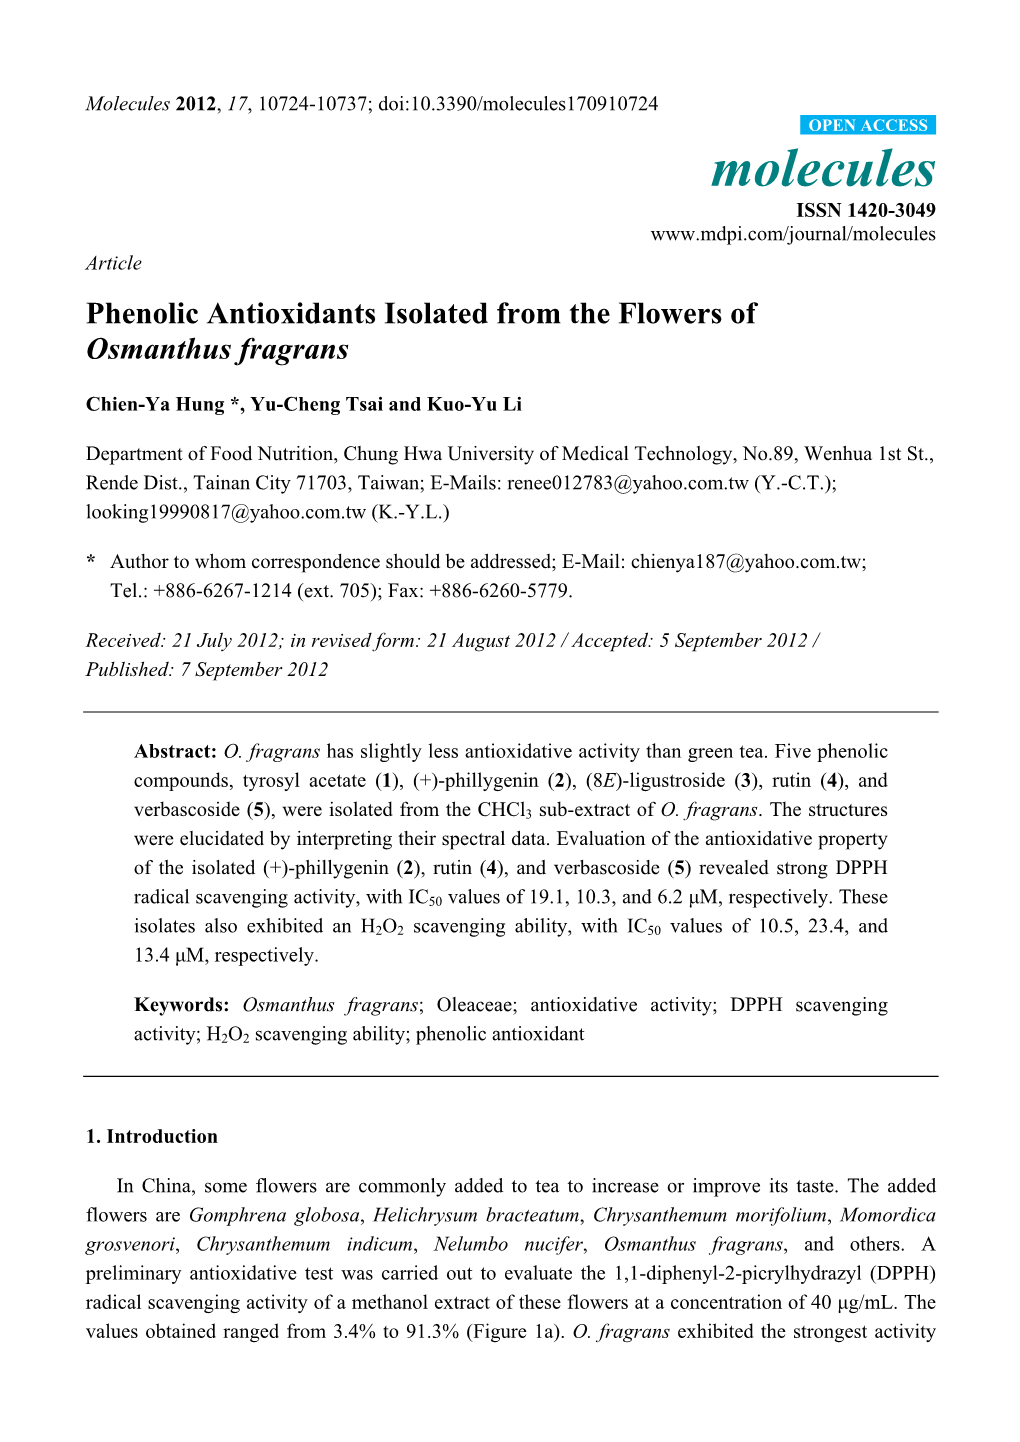 Phenolic Antioxidants Isolated from the Flowers of Osmanthus Fragrans